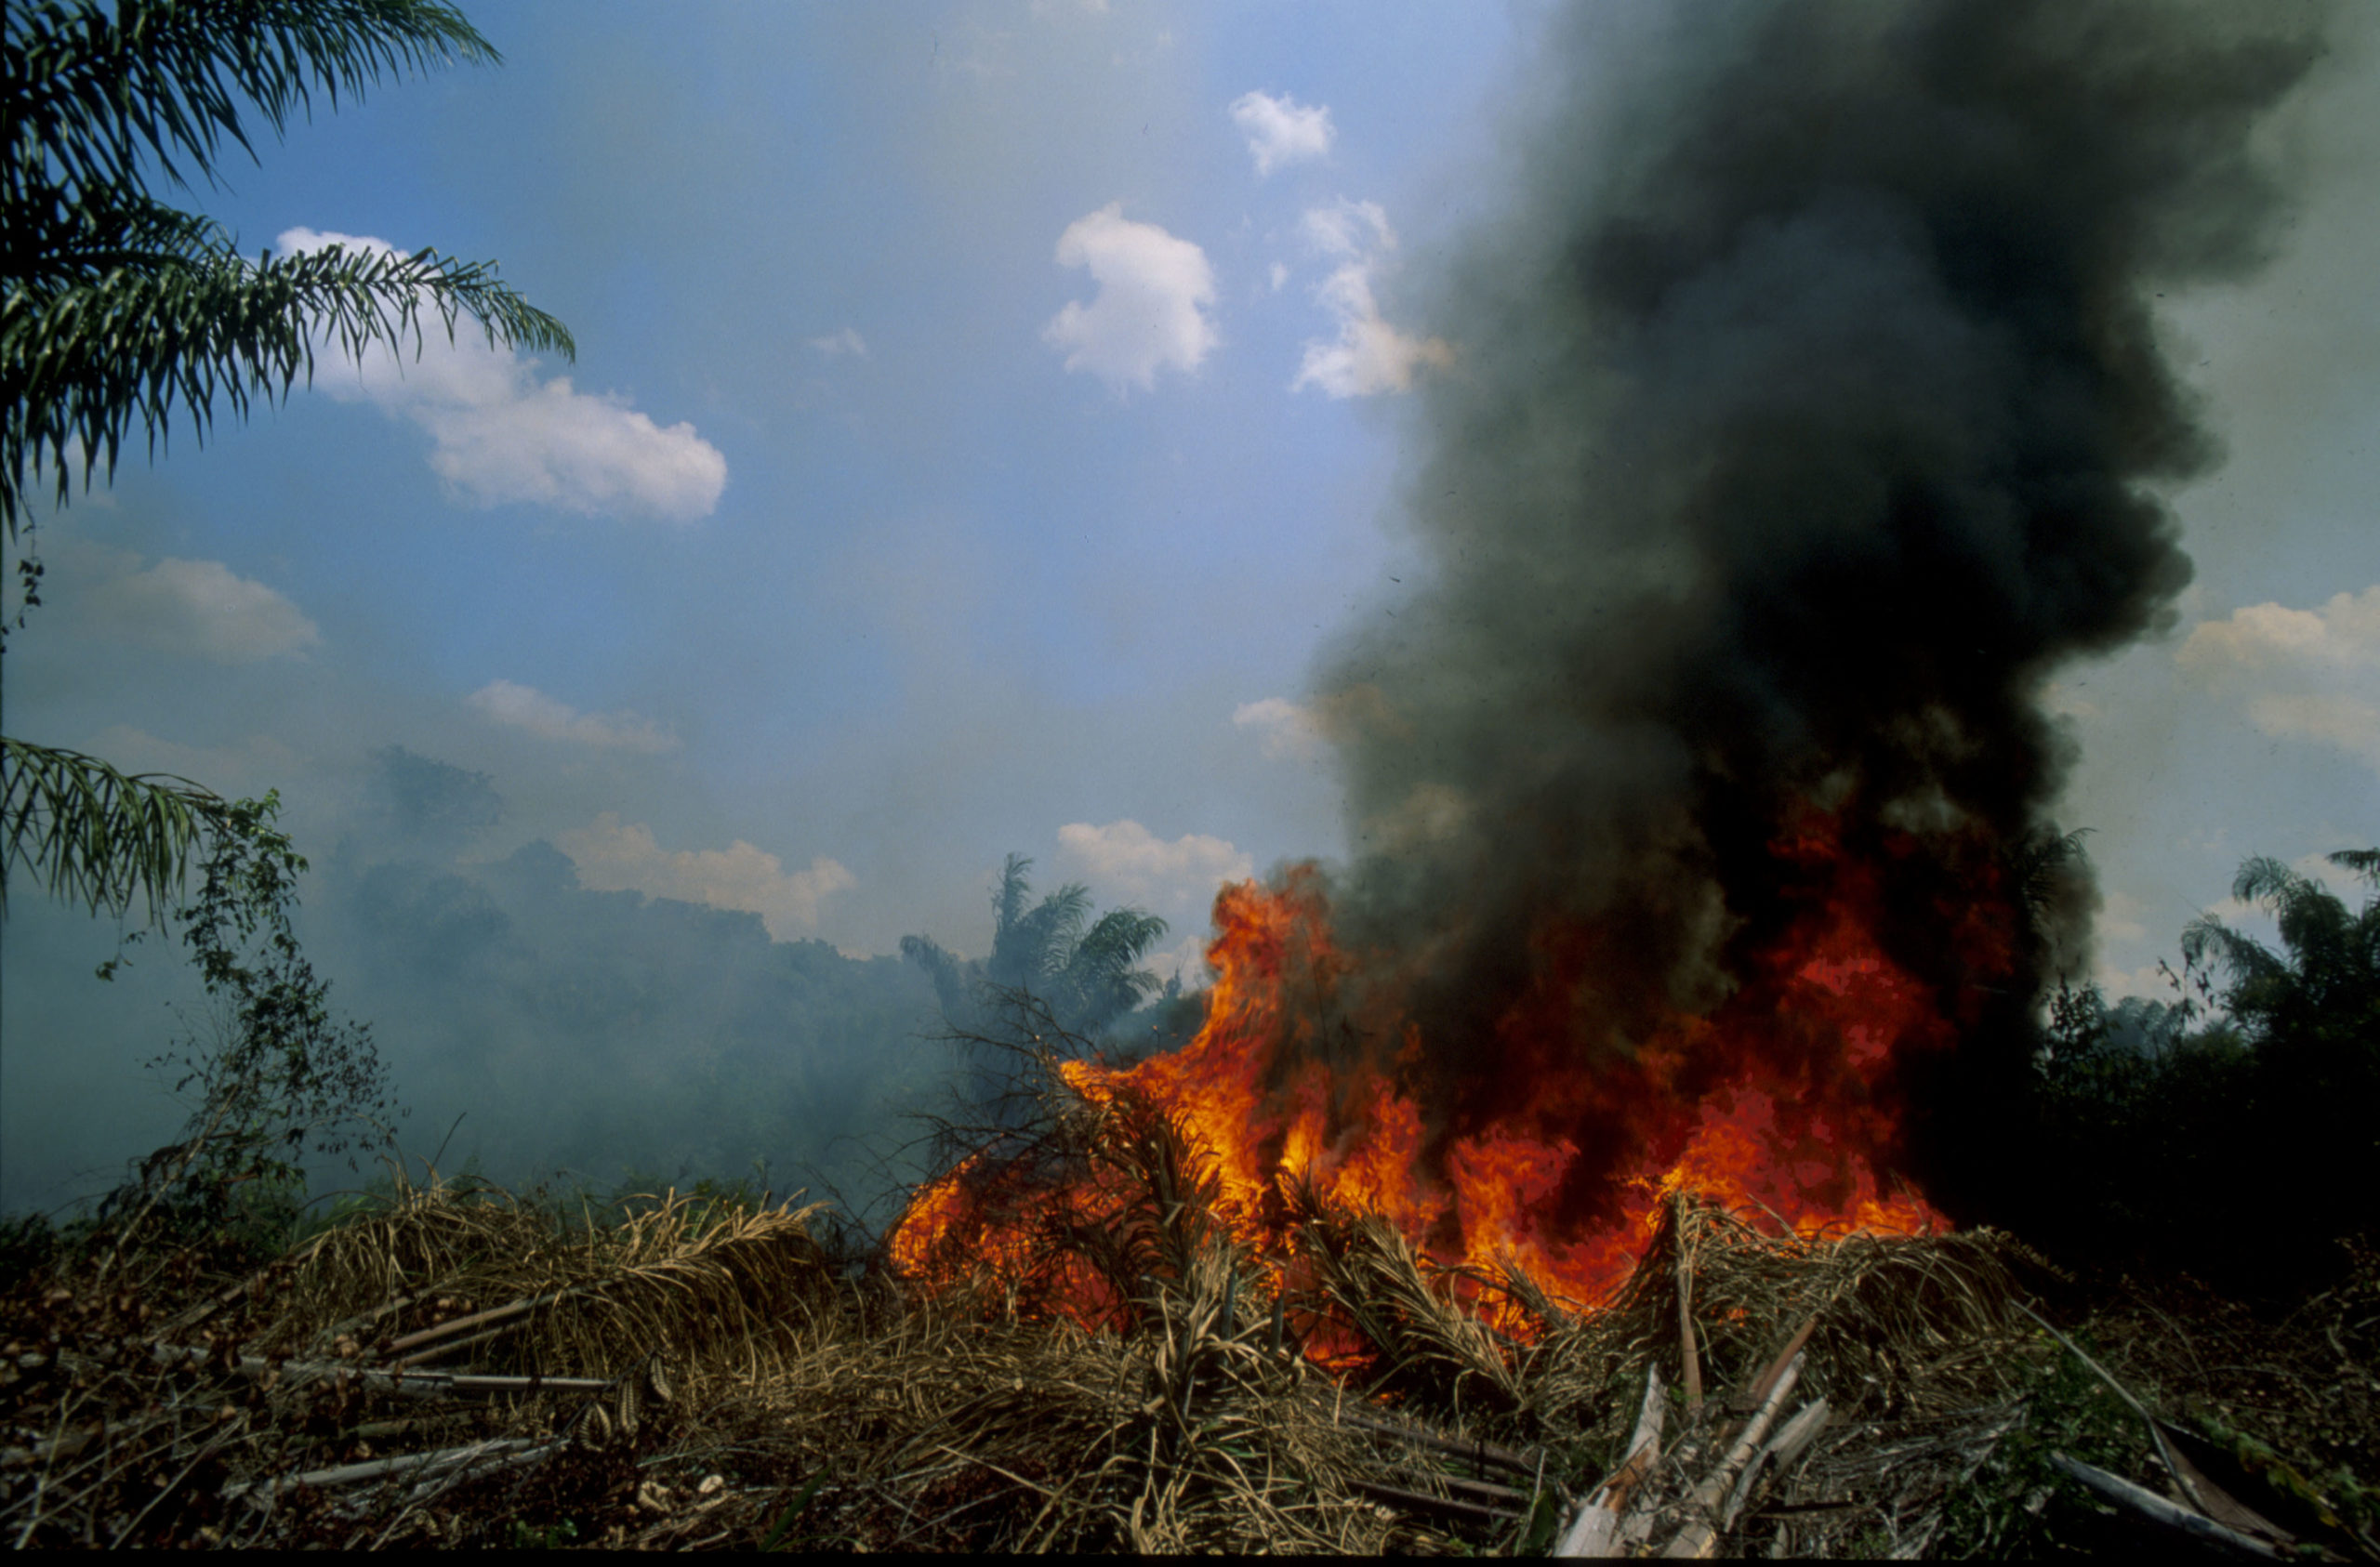 Fire management is one of the actions proposed by researchers that help mitigate climate change, whilst protecting both biodiversity and the livelihoods of local communities (Image: Flavio Cannalonga/Greenpeace)